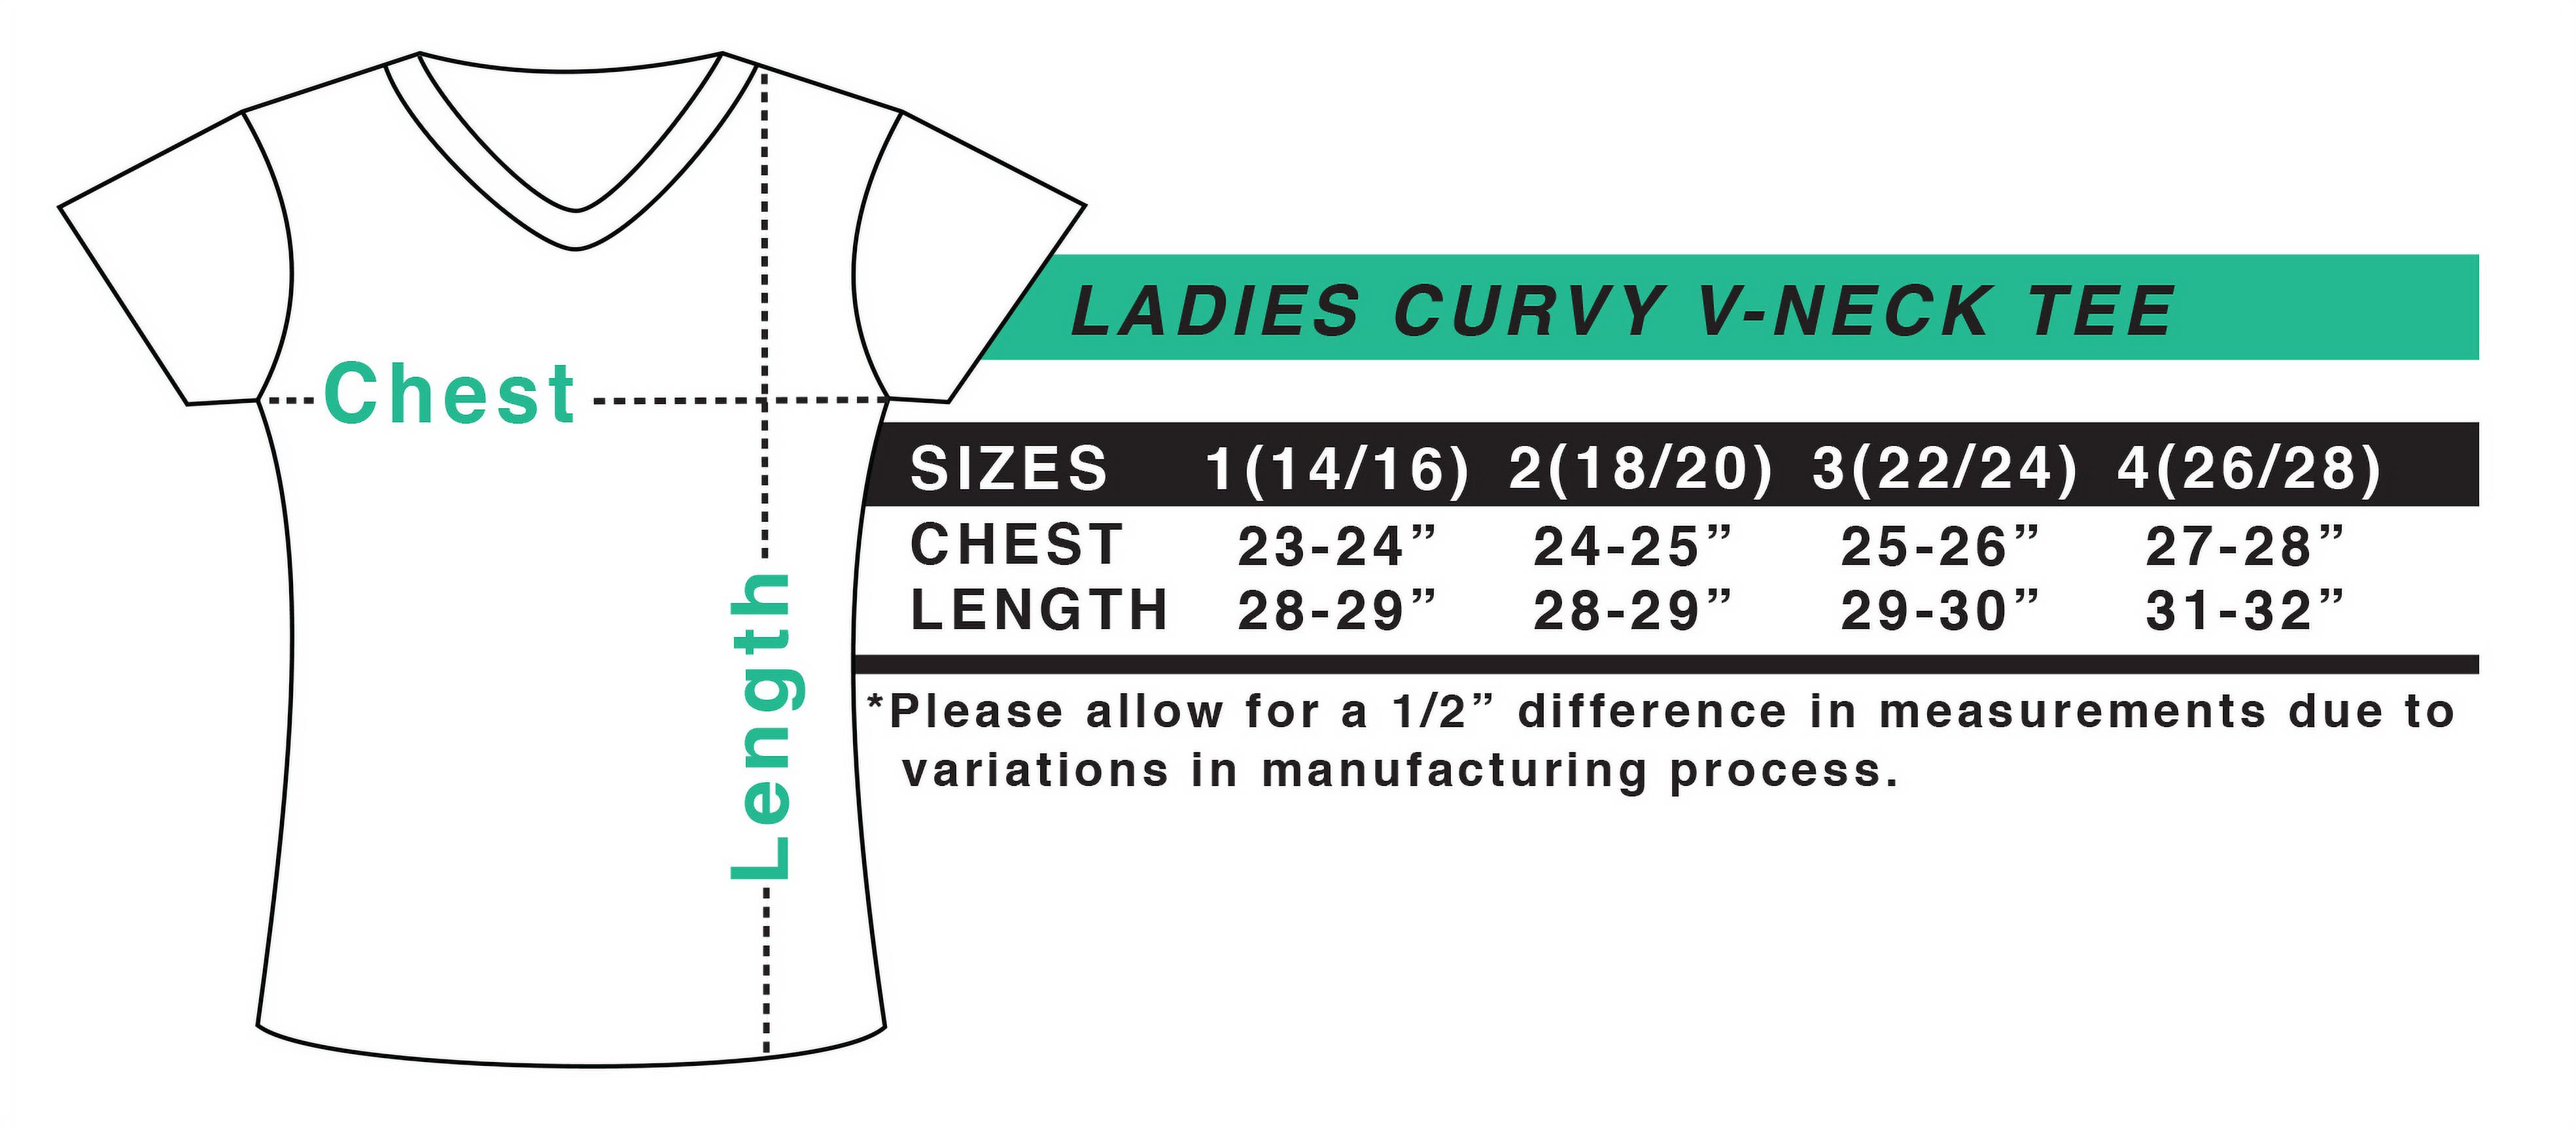 Inktastic Weekends are for Racing Race Car Silhouette and Racing Flag Women's Plus Size V-Neck T-Shirt - image 2 of 4